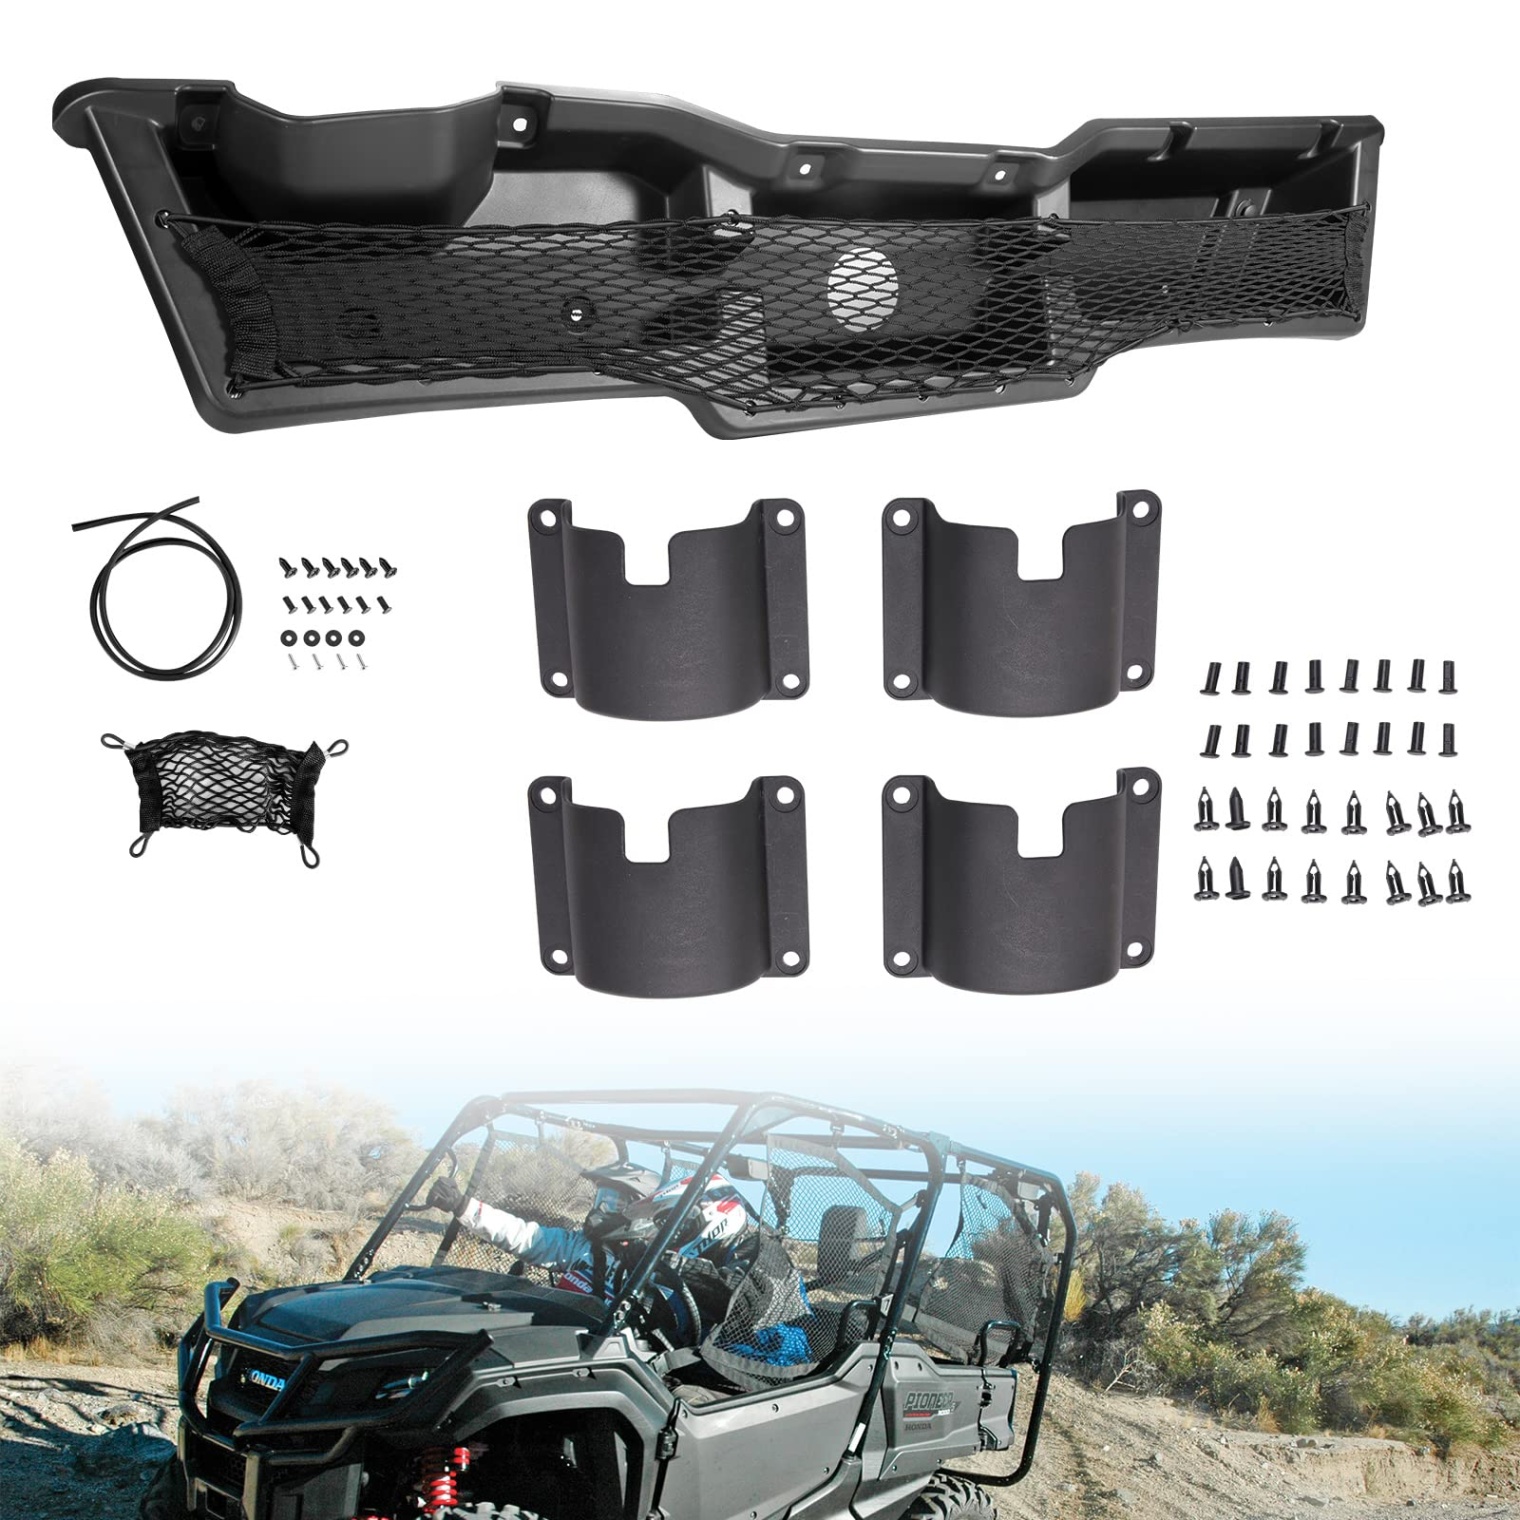 Upgrade Your Honda Pioneer 1000-5 With Top-notch Accessories For Off-Road Adventures